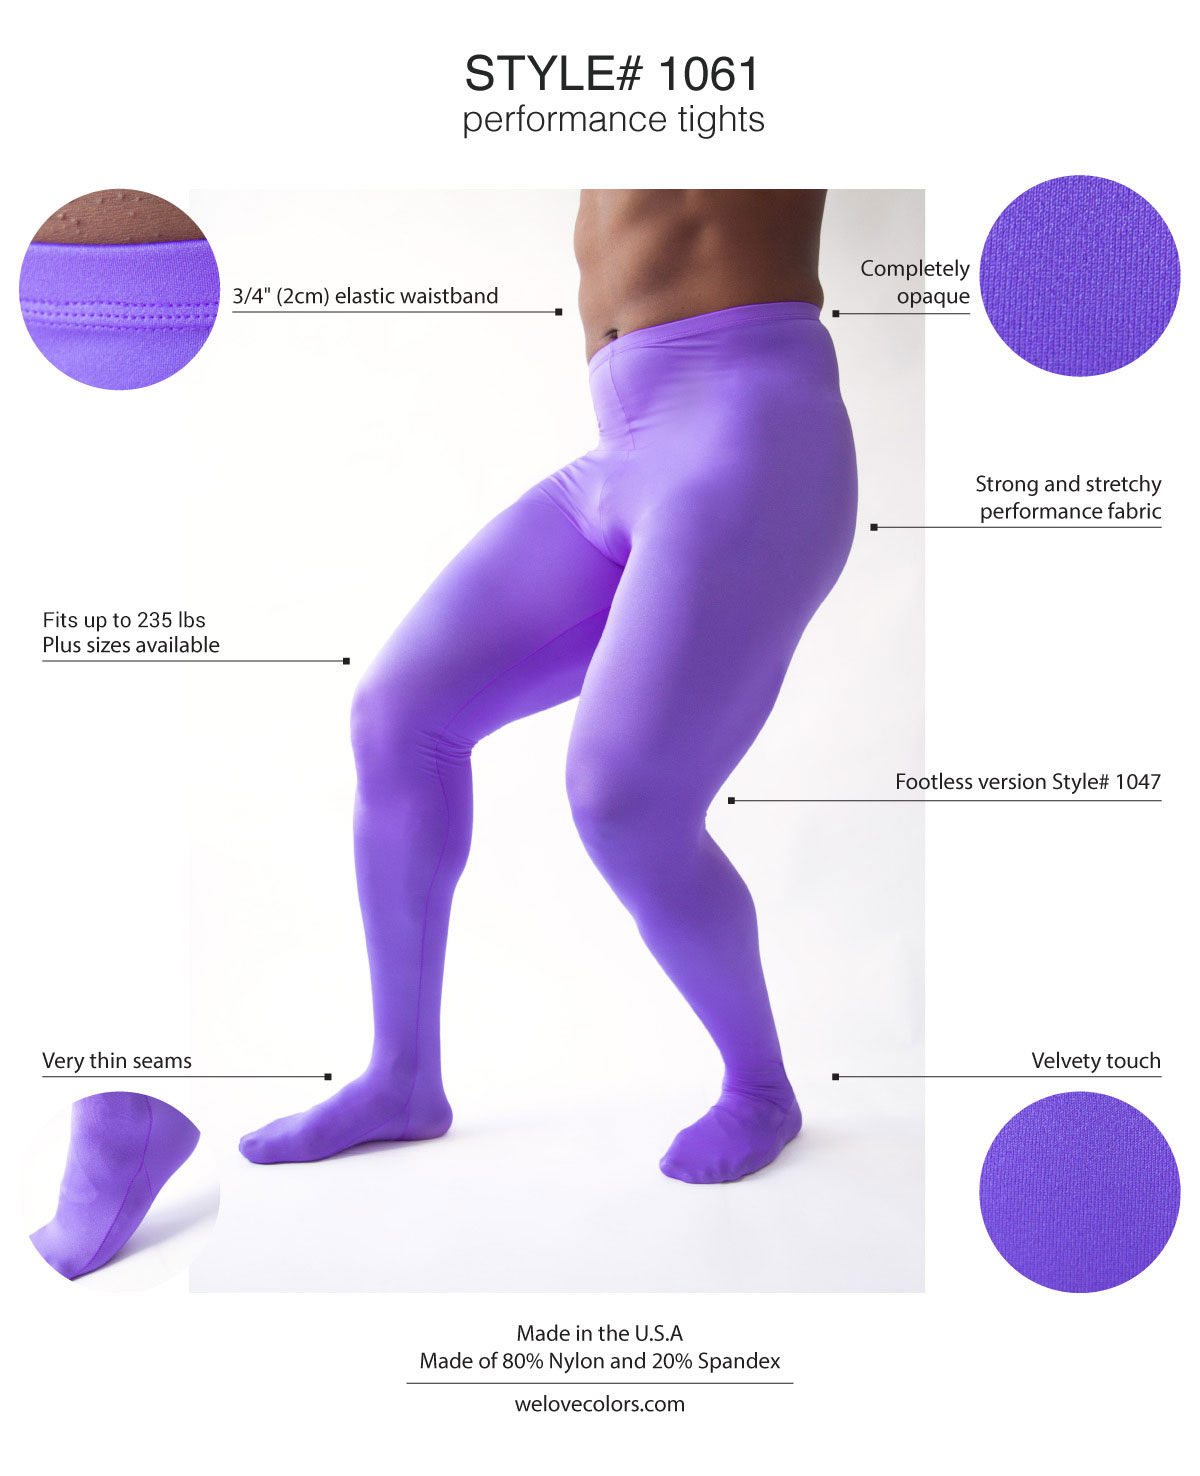 Men Colored Performance Tights Ballet Welovecolors